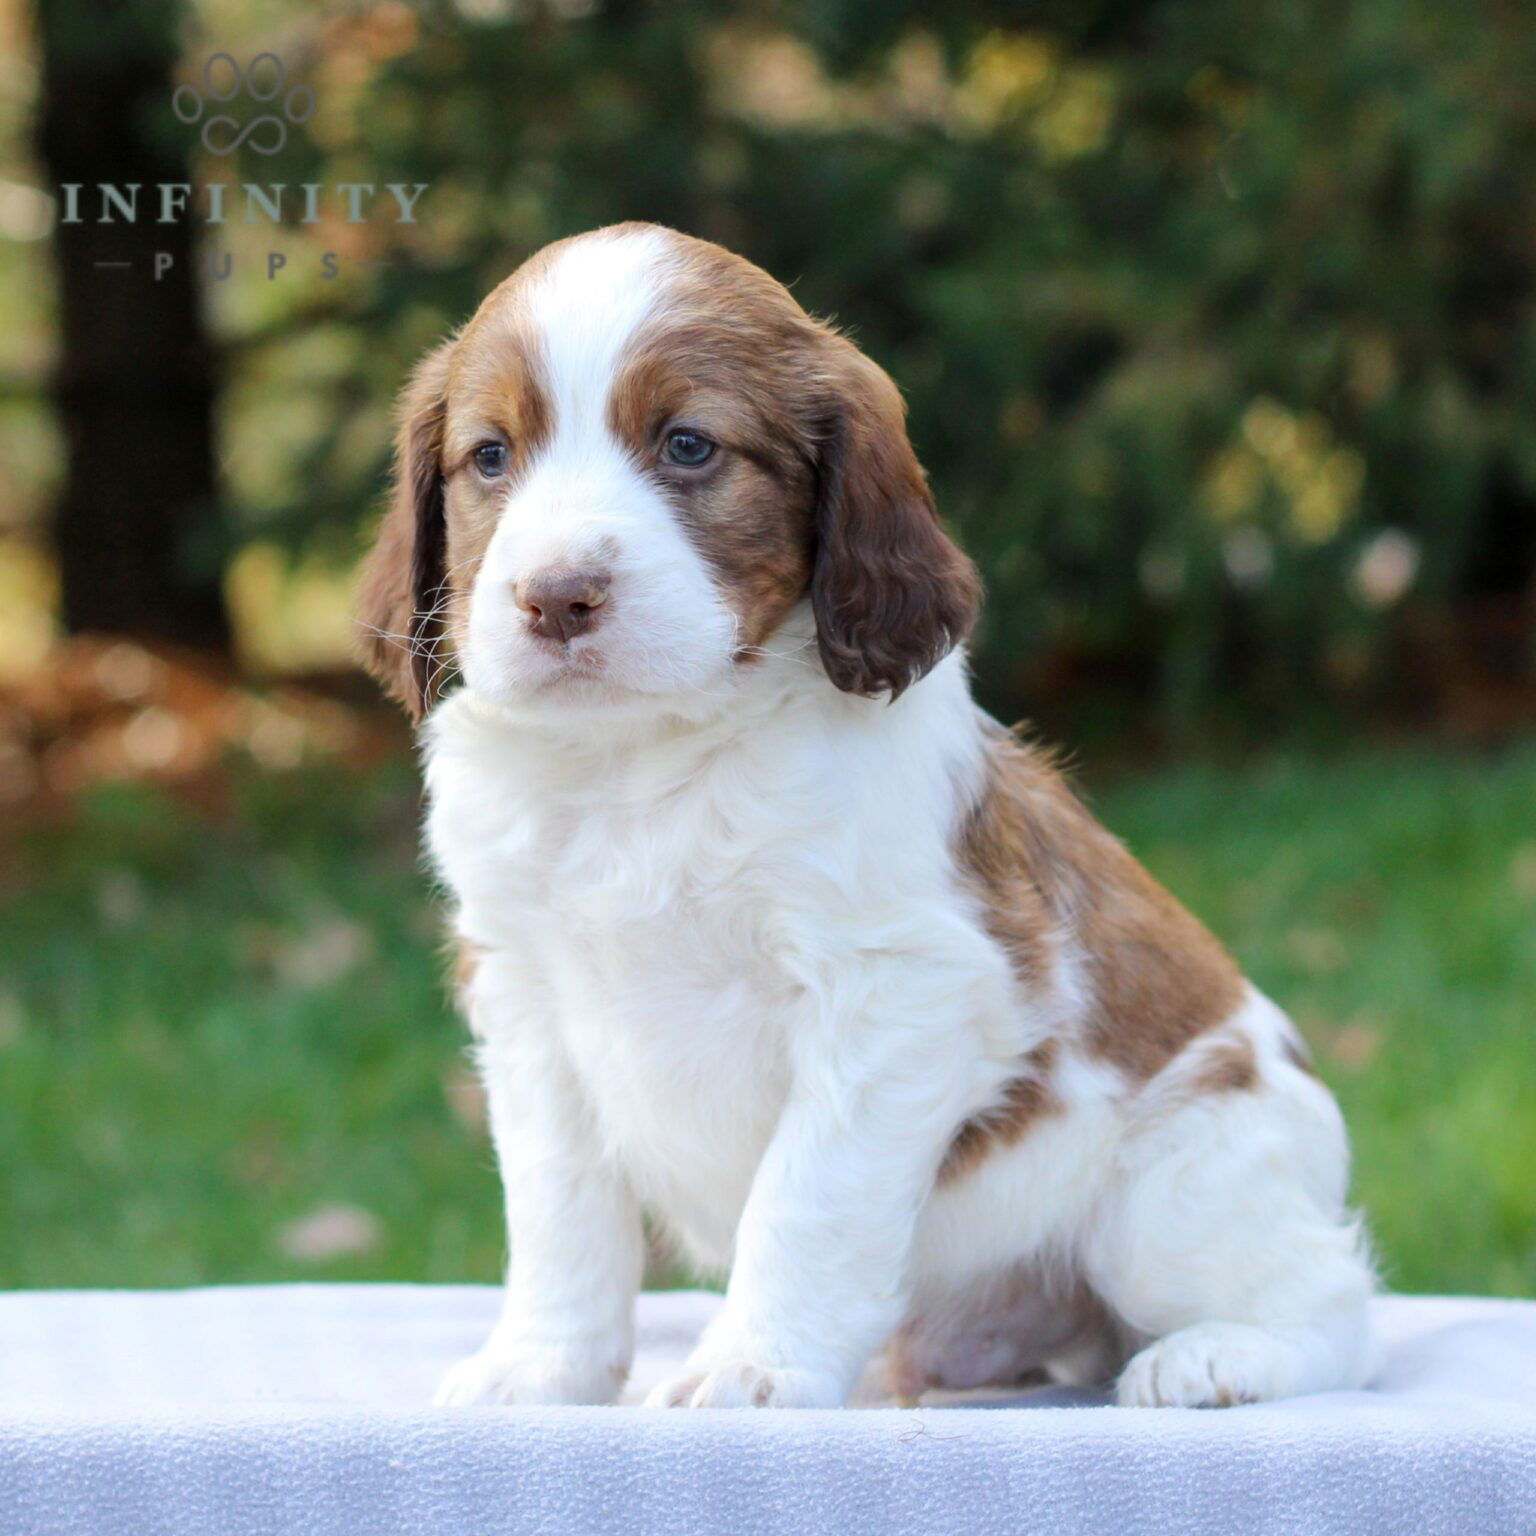 Crumbs - AKC English Springer Spaniel puppy for sale